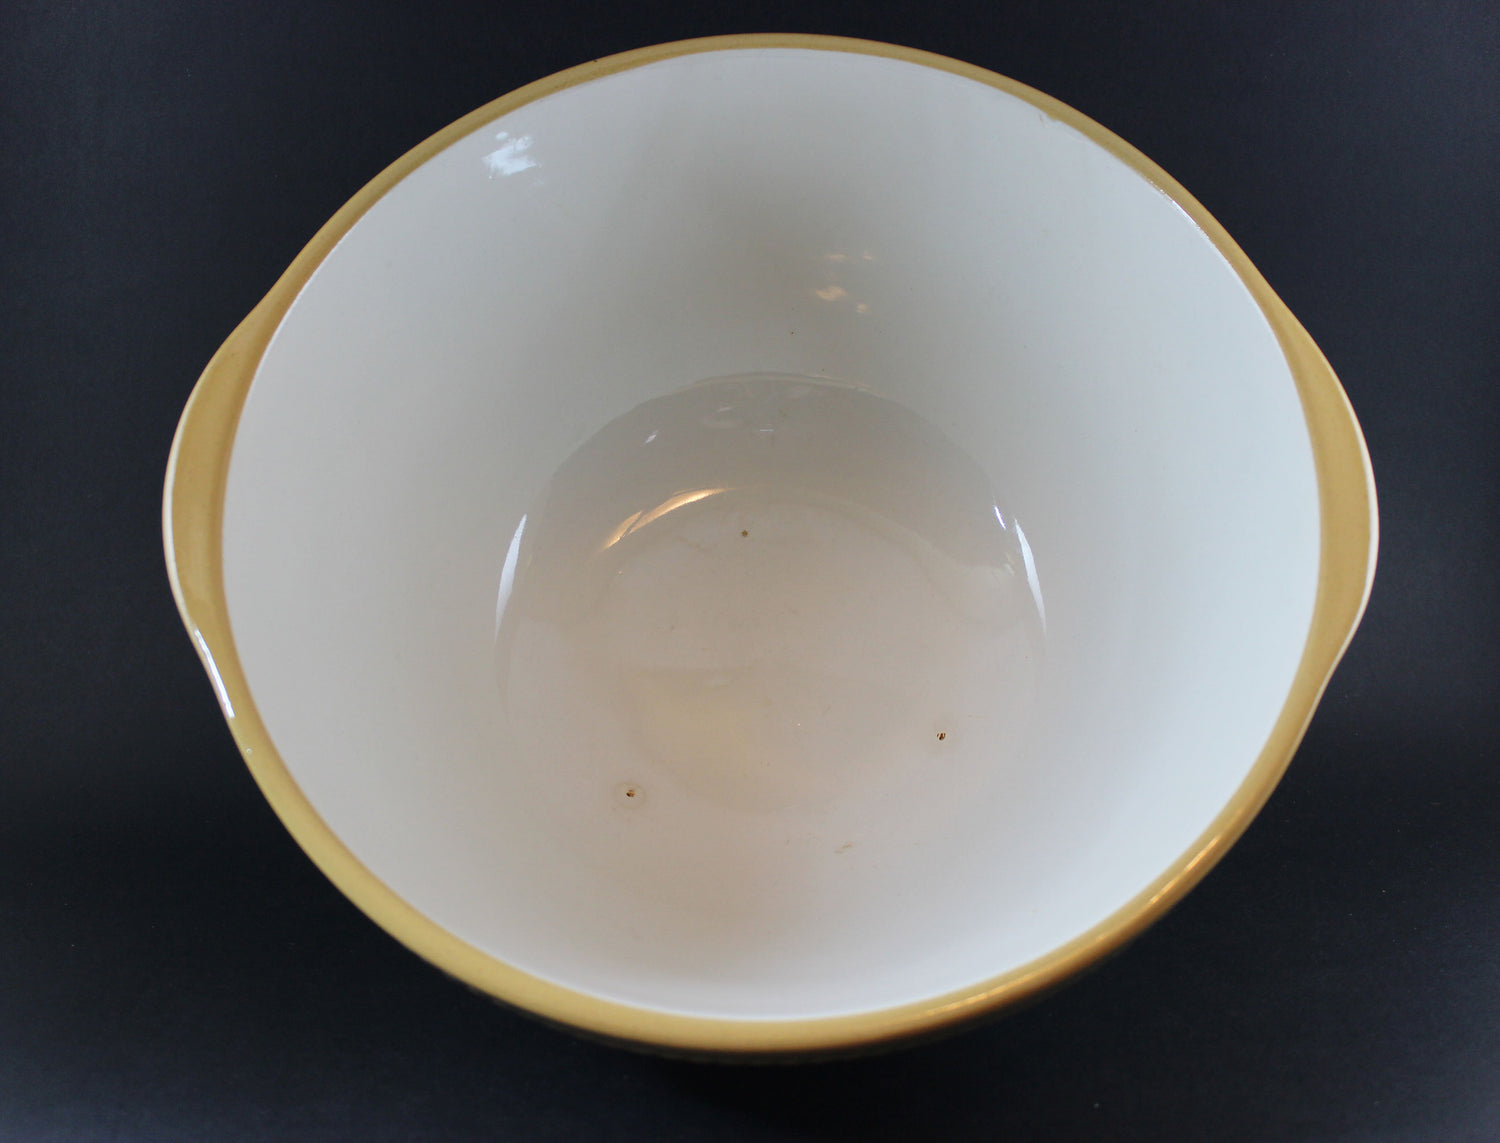 T. G. Green, Vintage Yellow Ware Gripstand Mixing Bowl, 11 Inch